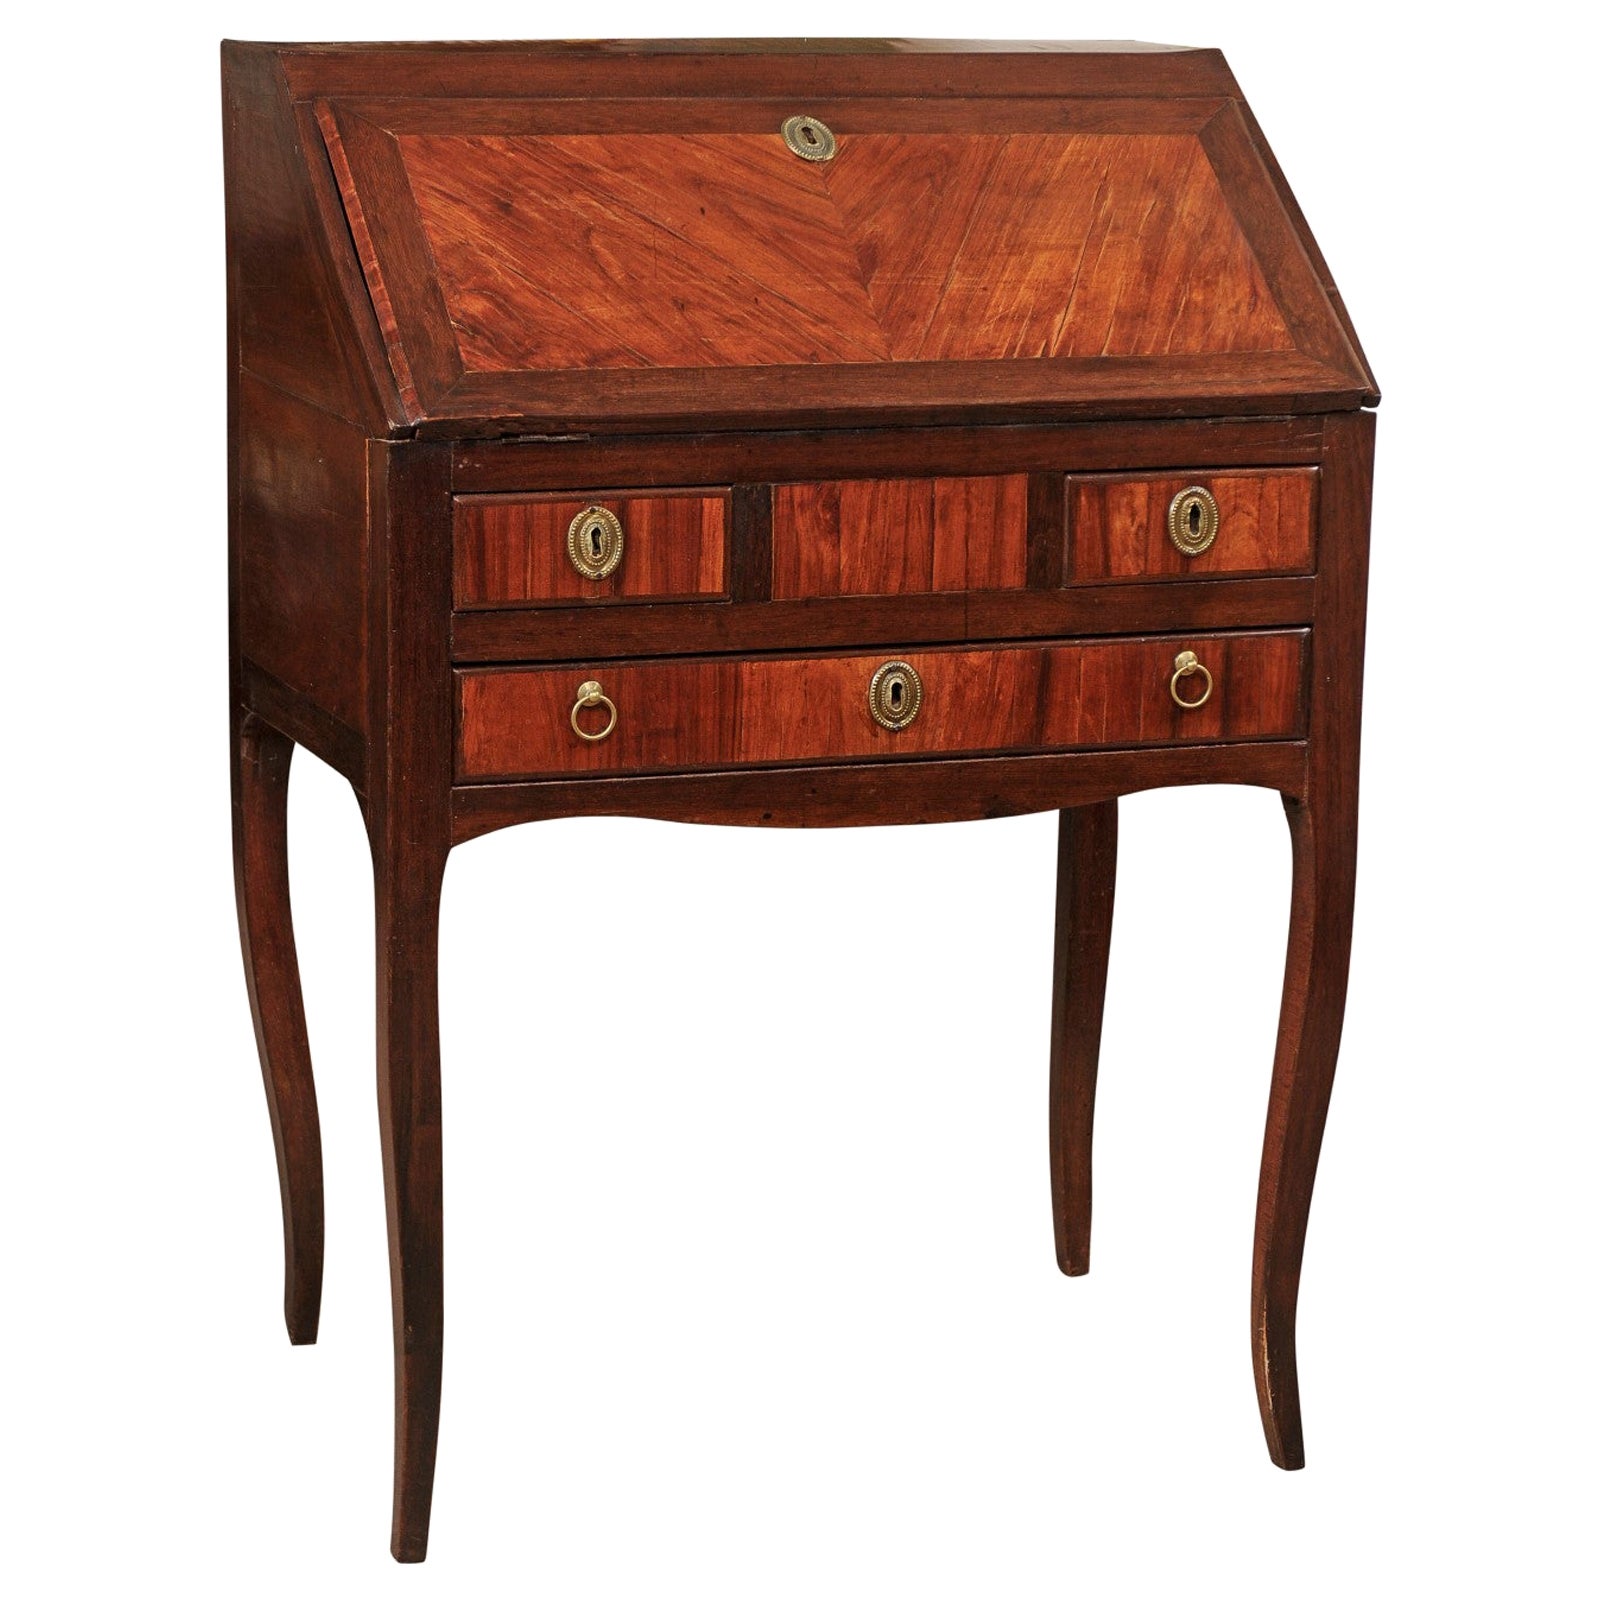 Petite Slant-Front Bureau in Kingwood with Fitted Interior & Leather Blotter For Sale